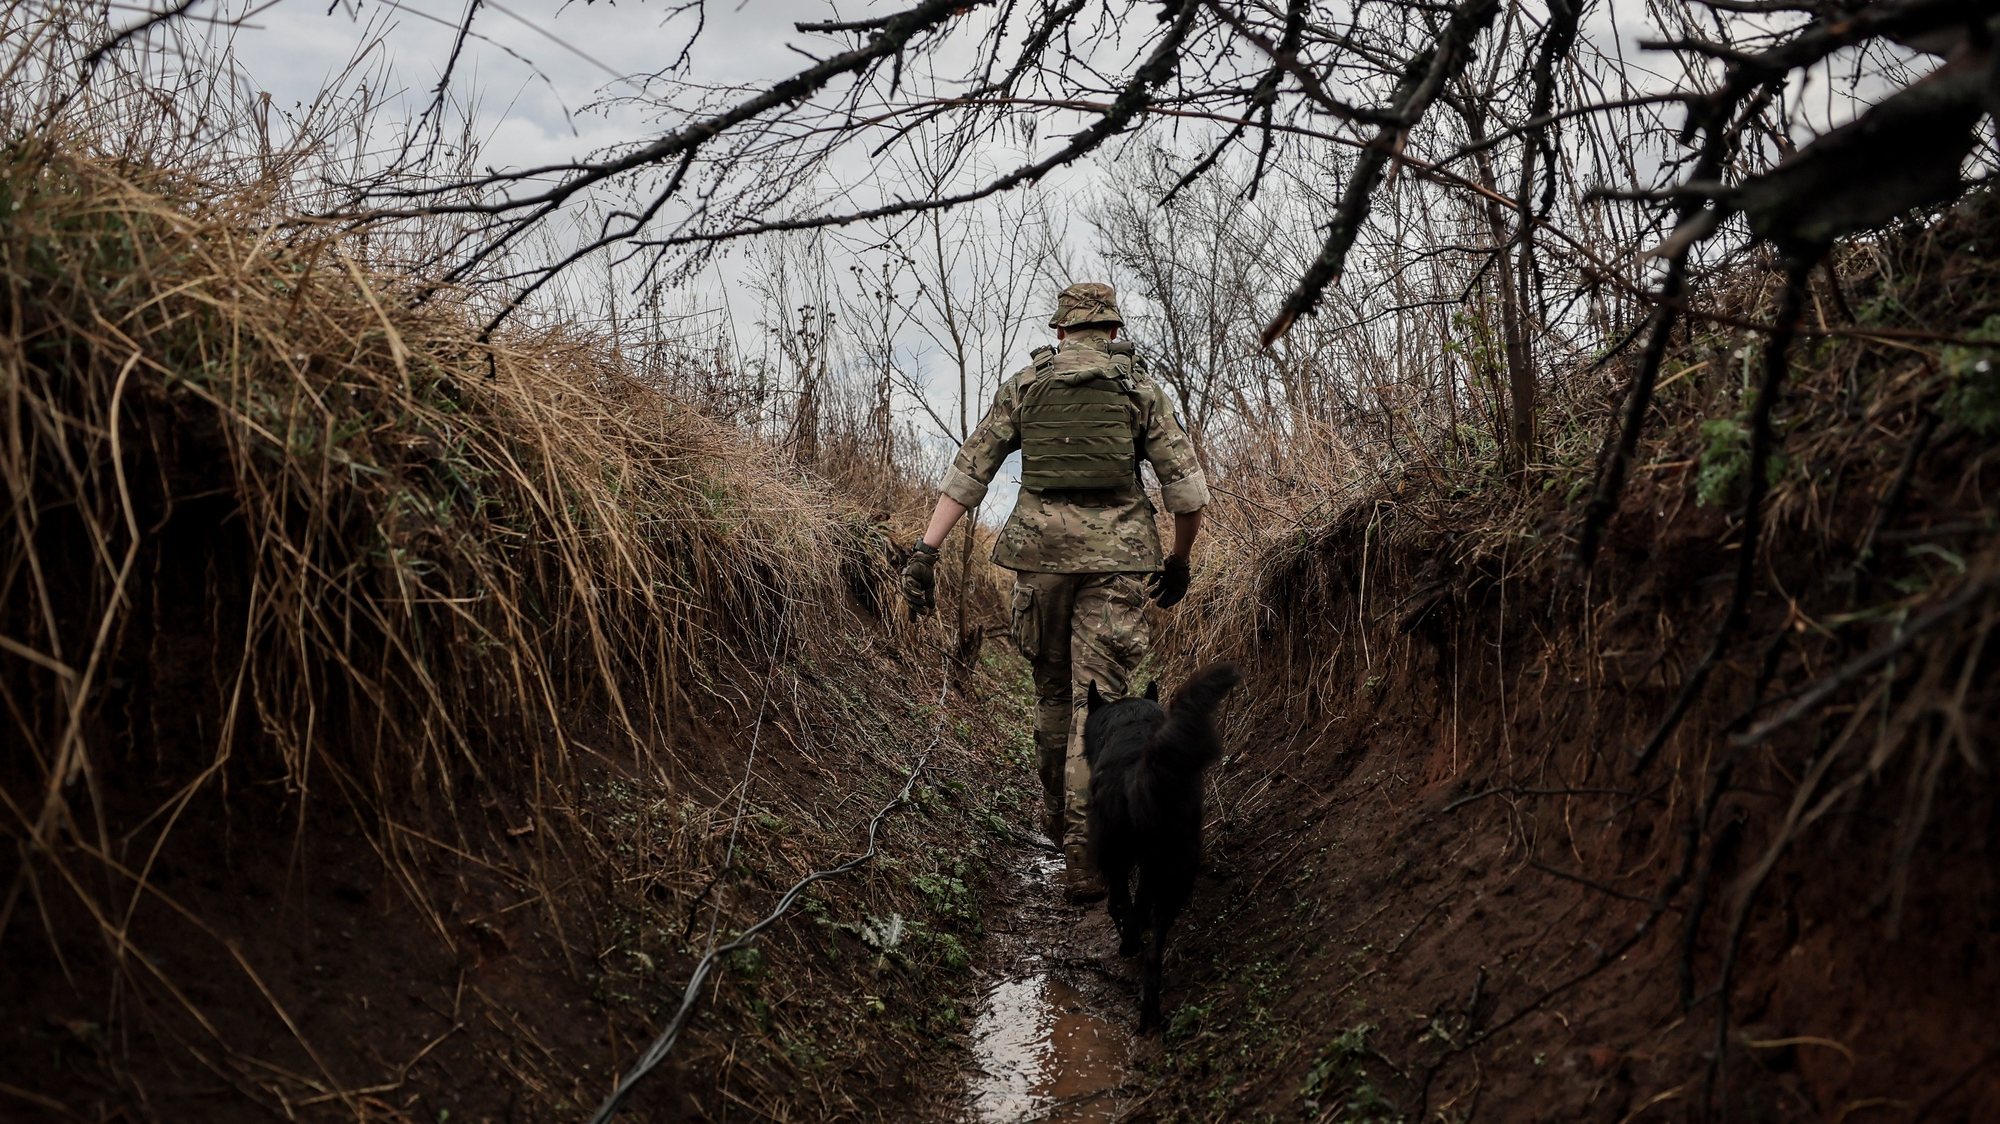 epa10960805 Call-sign Jimmy, commander of a unit of the 24-th Mechanized Brigade and Chorna(Black), a service dog moves through a trench in the Donetsk region, Ukraine, 06 November 2023. Commander Jimmy is an economist. Before the Russian invasion he was the CEO of a small company, which traded spare parts for cars. Jimmy decided to enlist to the army in March 2022, after his home town of Chernihiv came under attack. After several months in the army he got a short military education and became the commander of a company of soldiers. Russian troops entered Ukrainian territory in February 2022, starting a conflict that has provoked destruction and a humanitarian crisis.  EPA/Oleg Petrasyuk  ATTENTION: This Image is part of a PHOTO SET